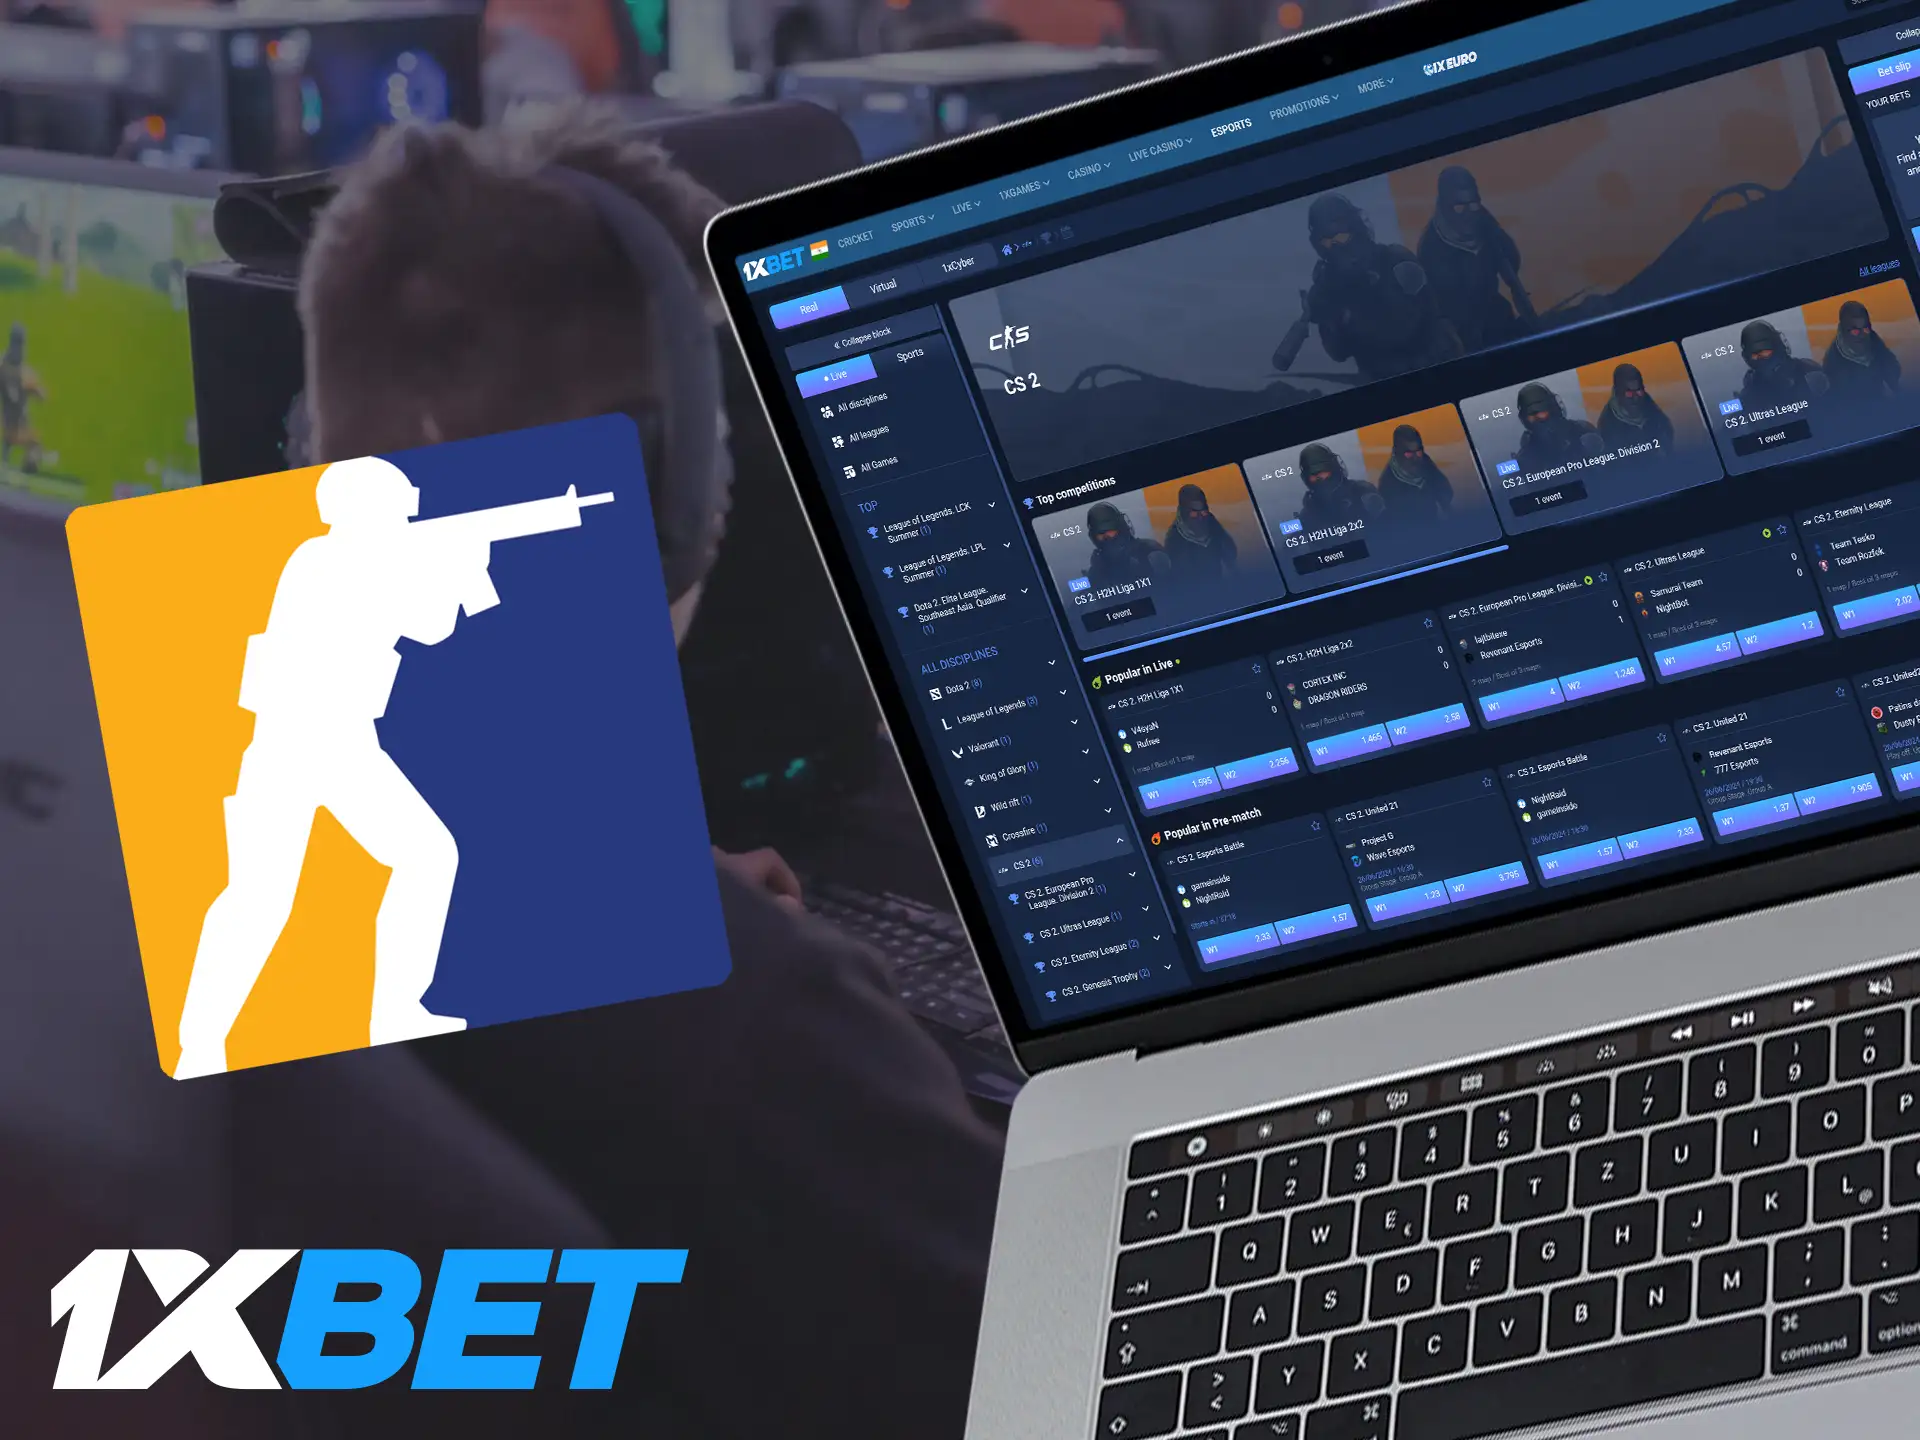 Counter-Strike 2 is one of the most popular choices for e-sports betting at 1xBet.